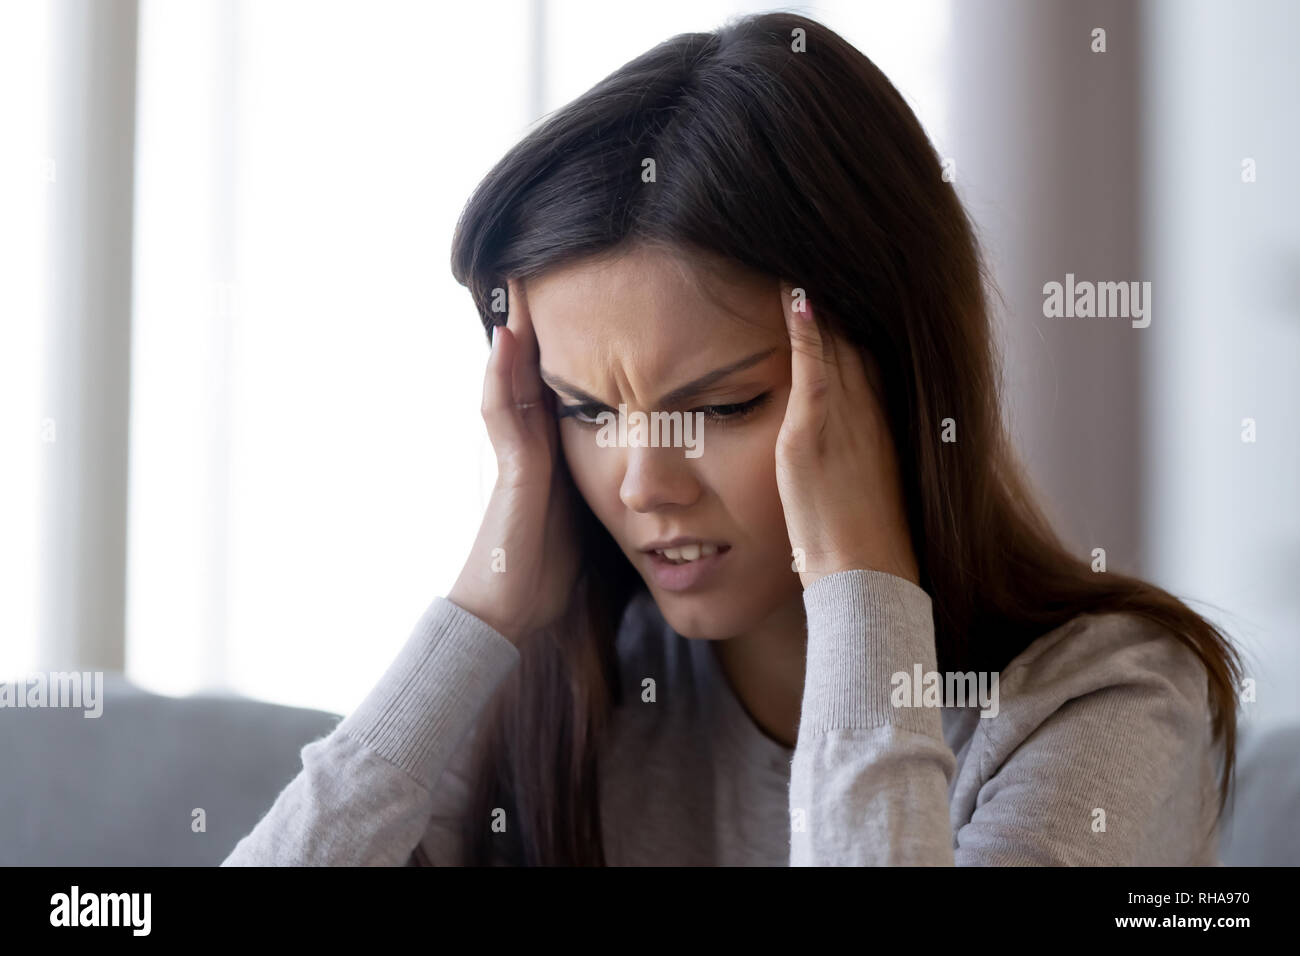 Upset stressed young woman feeling pain strong headache concept Stock Photo